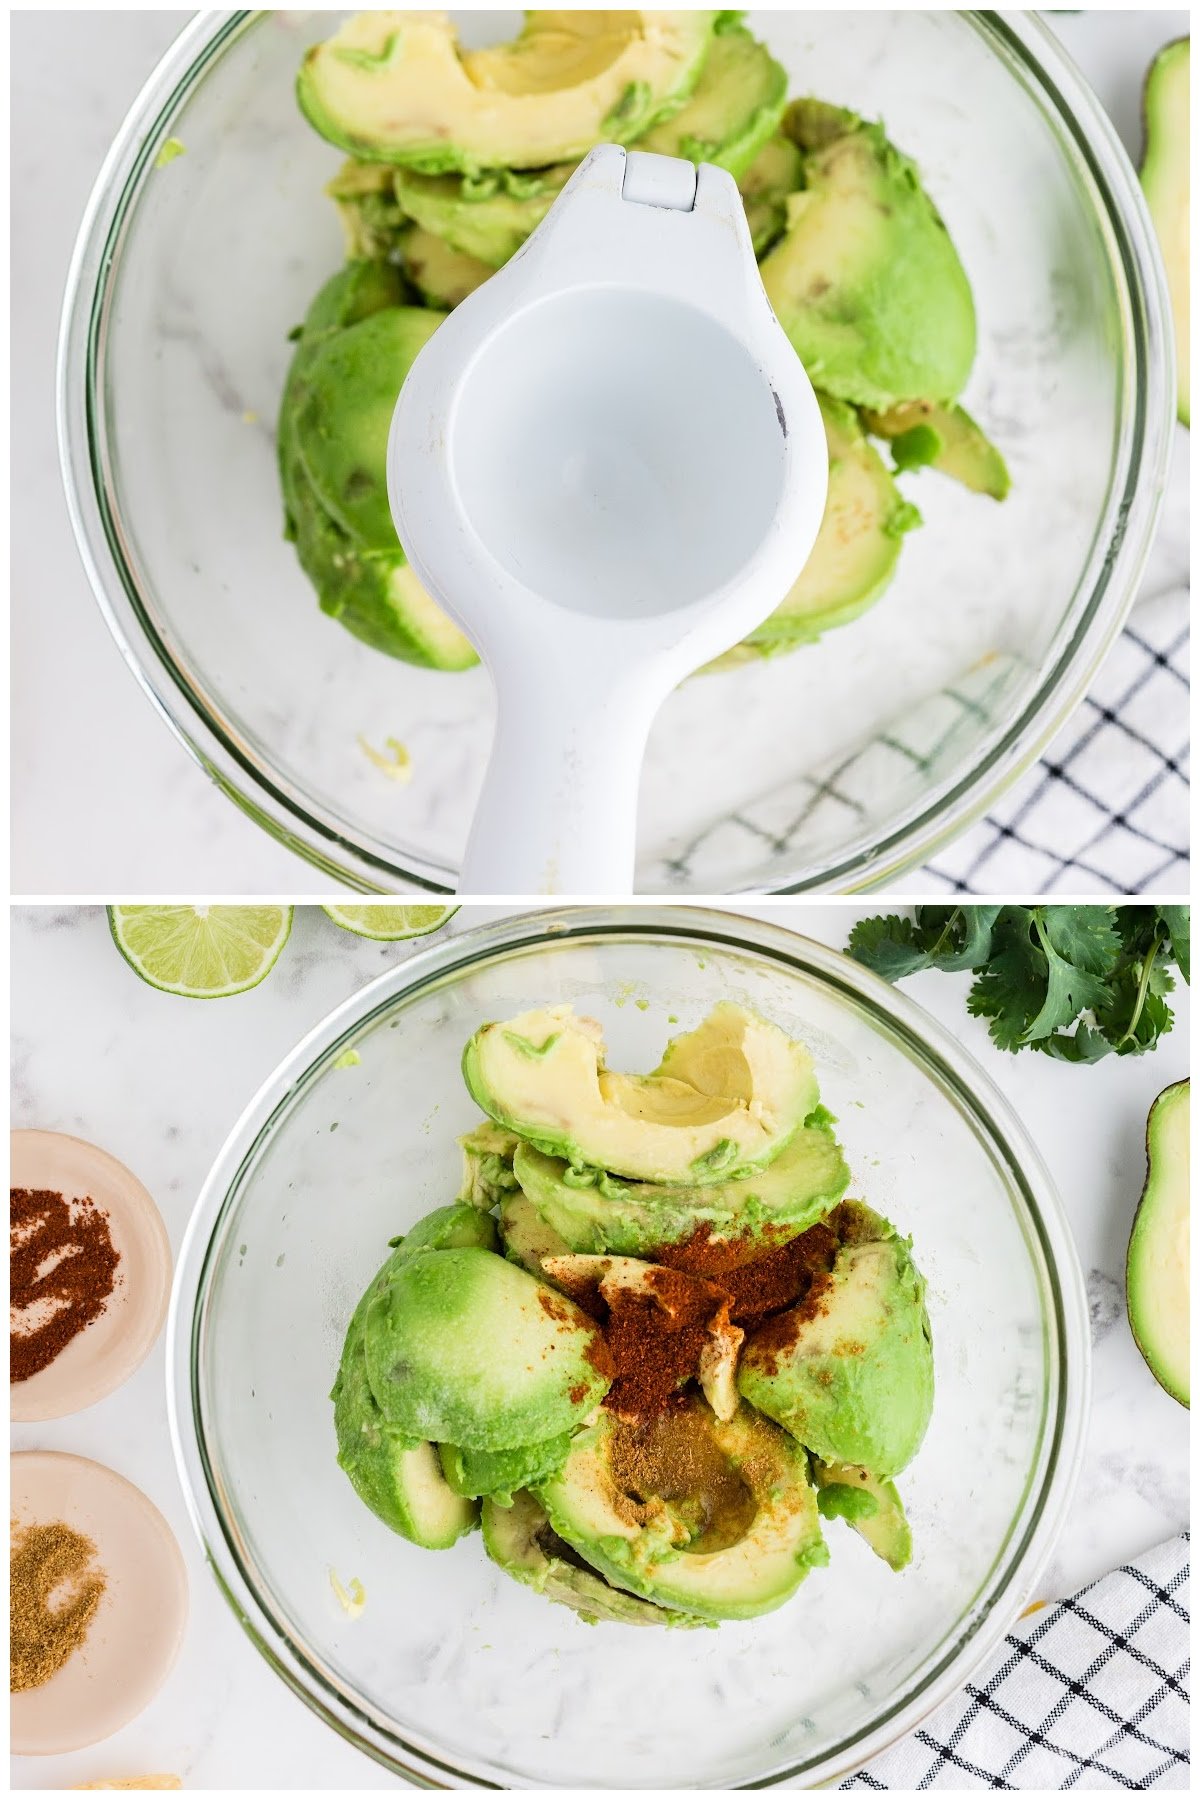 Squeezing fresh lime over the top of the bowl filled with avocado.